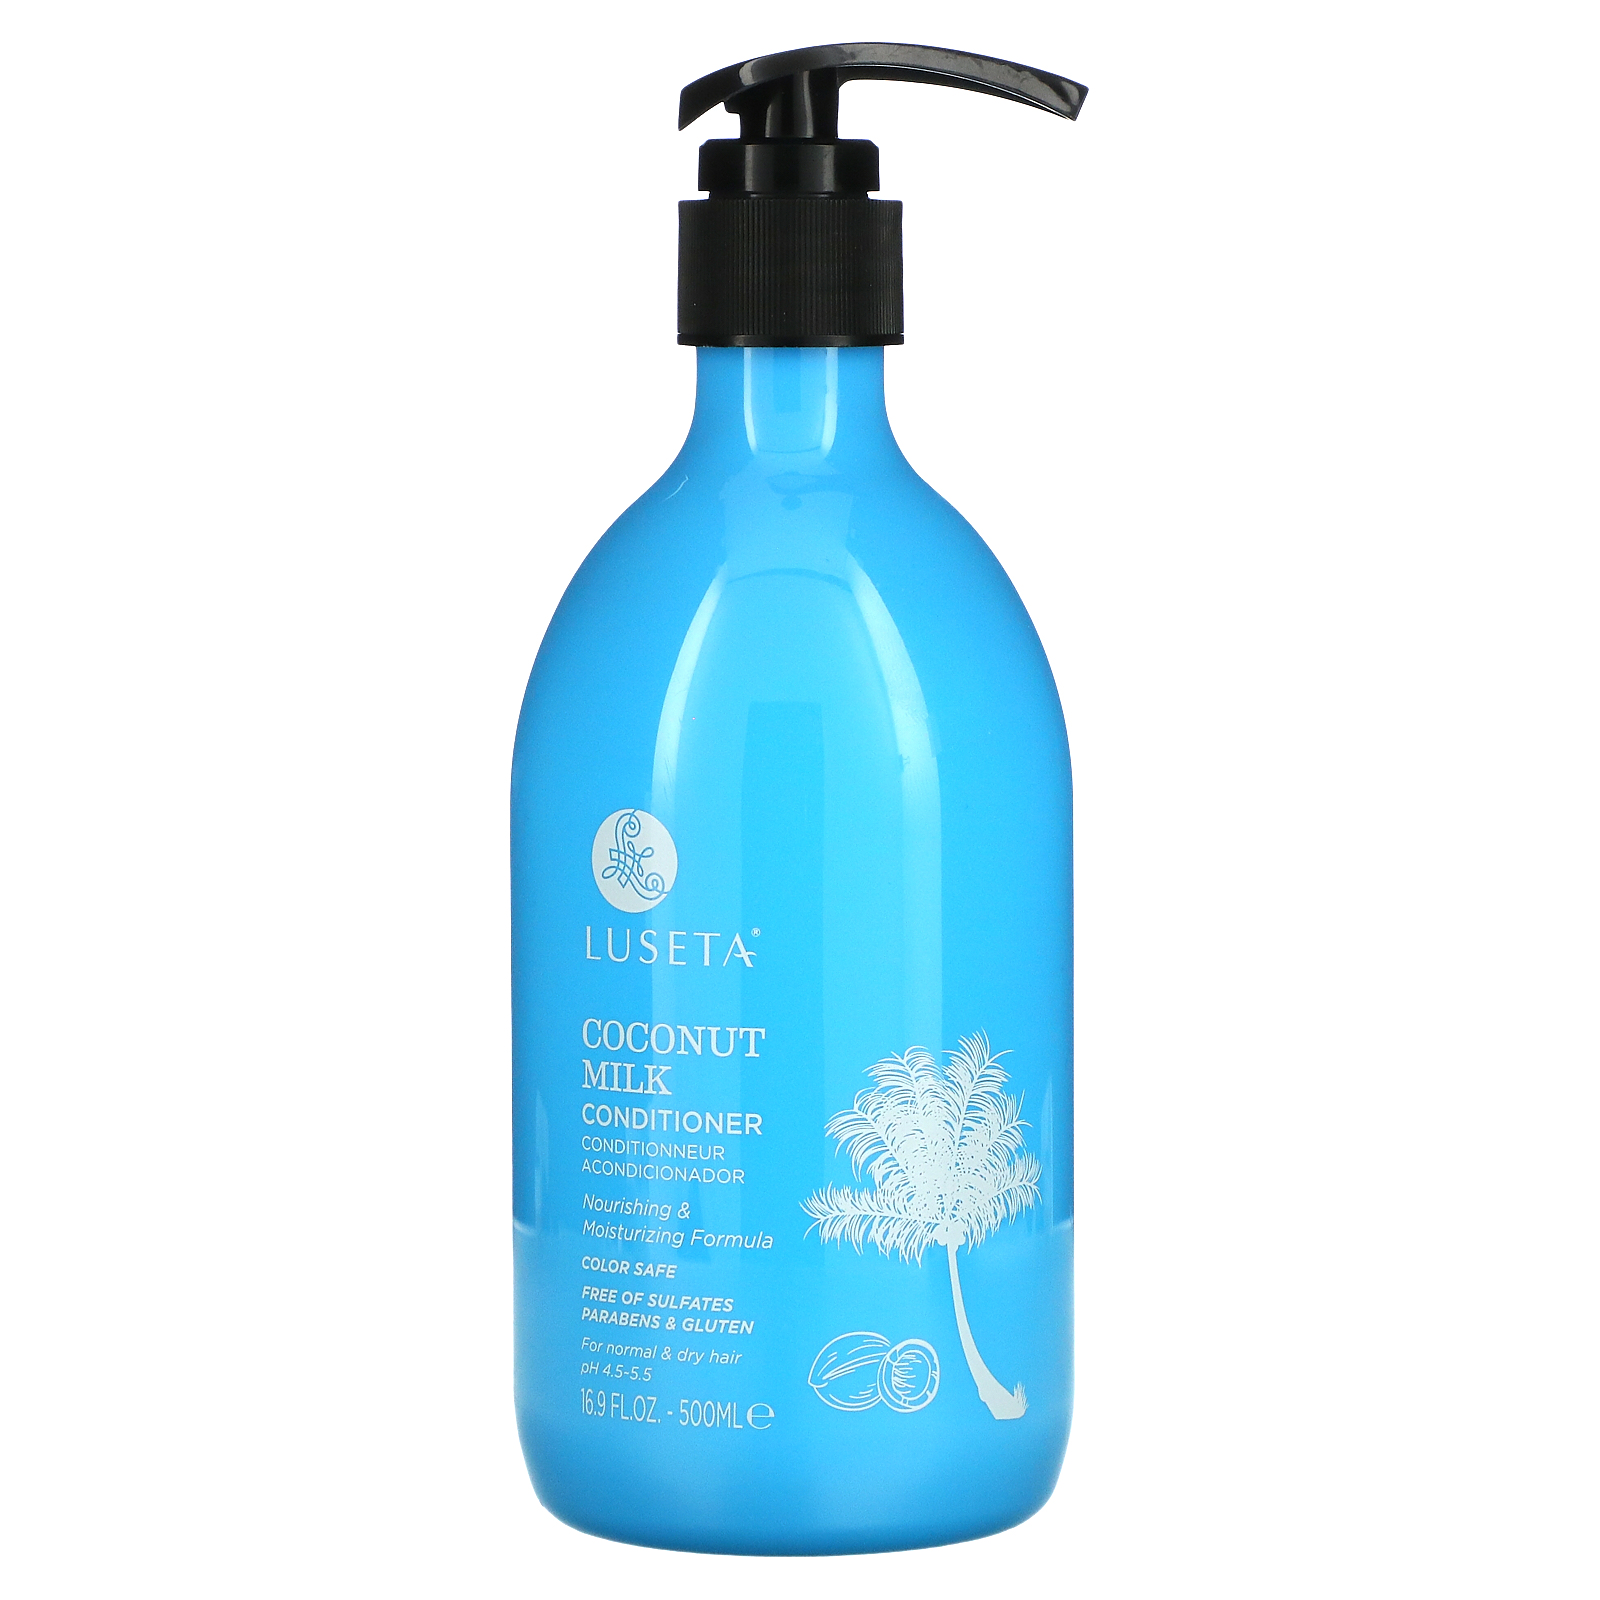 Luseta Beauty Conditioner, For Normal & Dry Hair, Coconut Milk, 16.9 fl oz (500 ml) - image 1 of 2